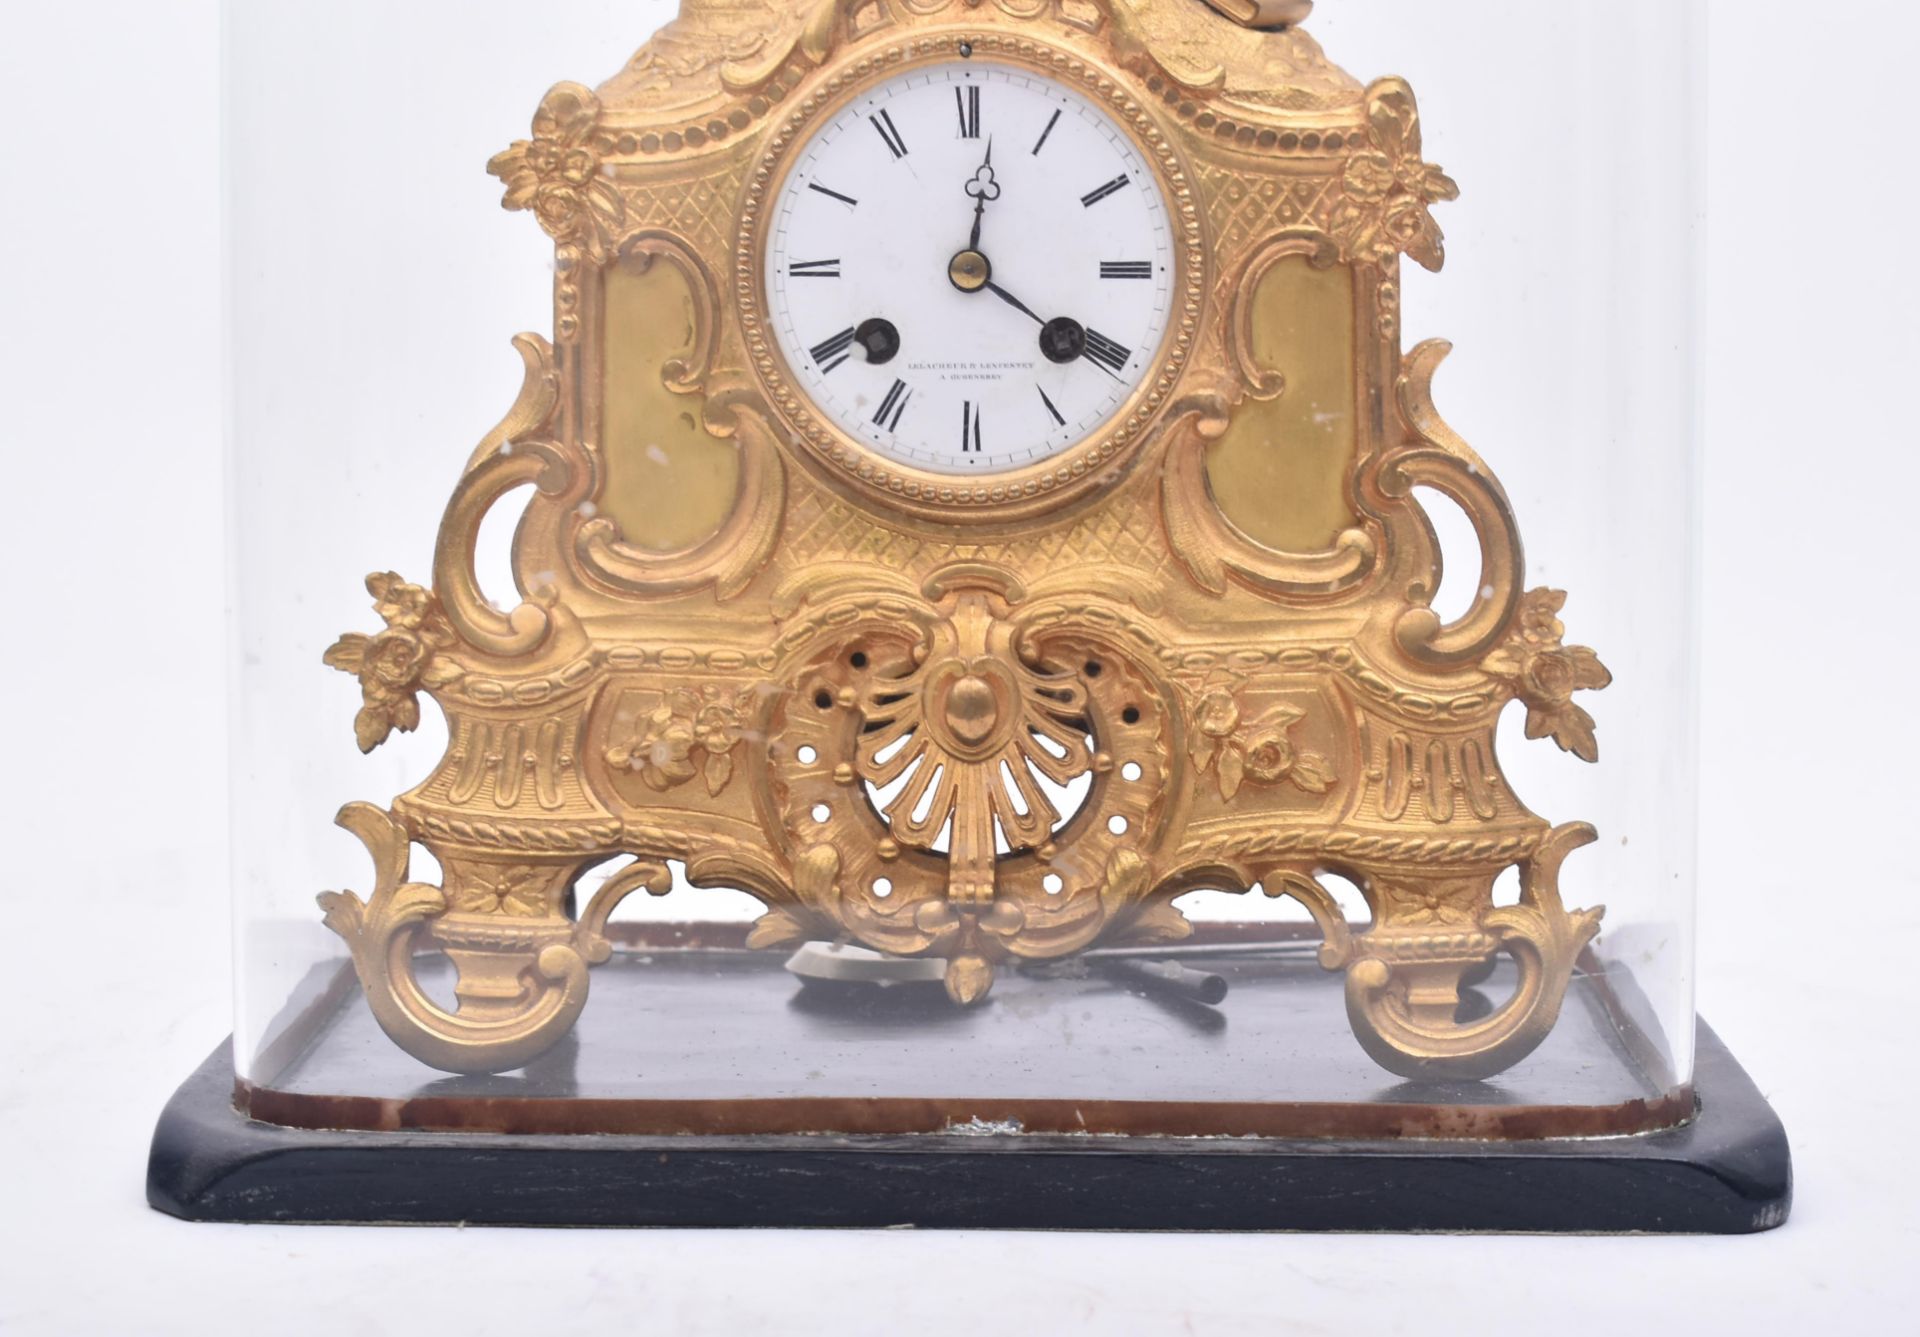 19TH CENTURY FRENCH VINCENTI & CIE DOME MANTEL CLOCK - Image 2 of 8